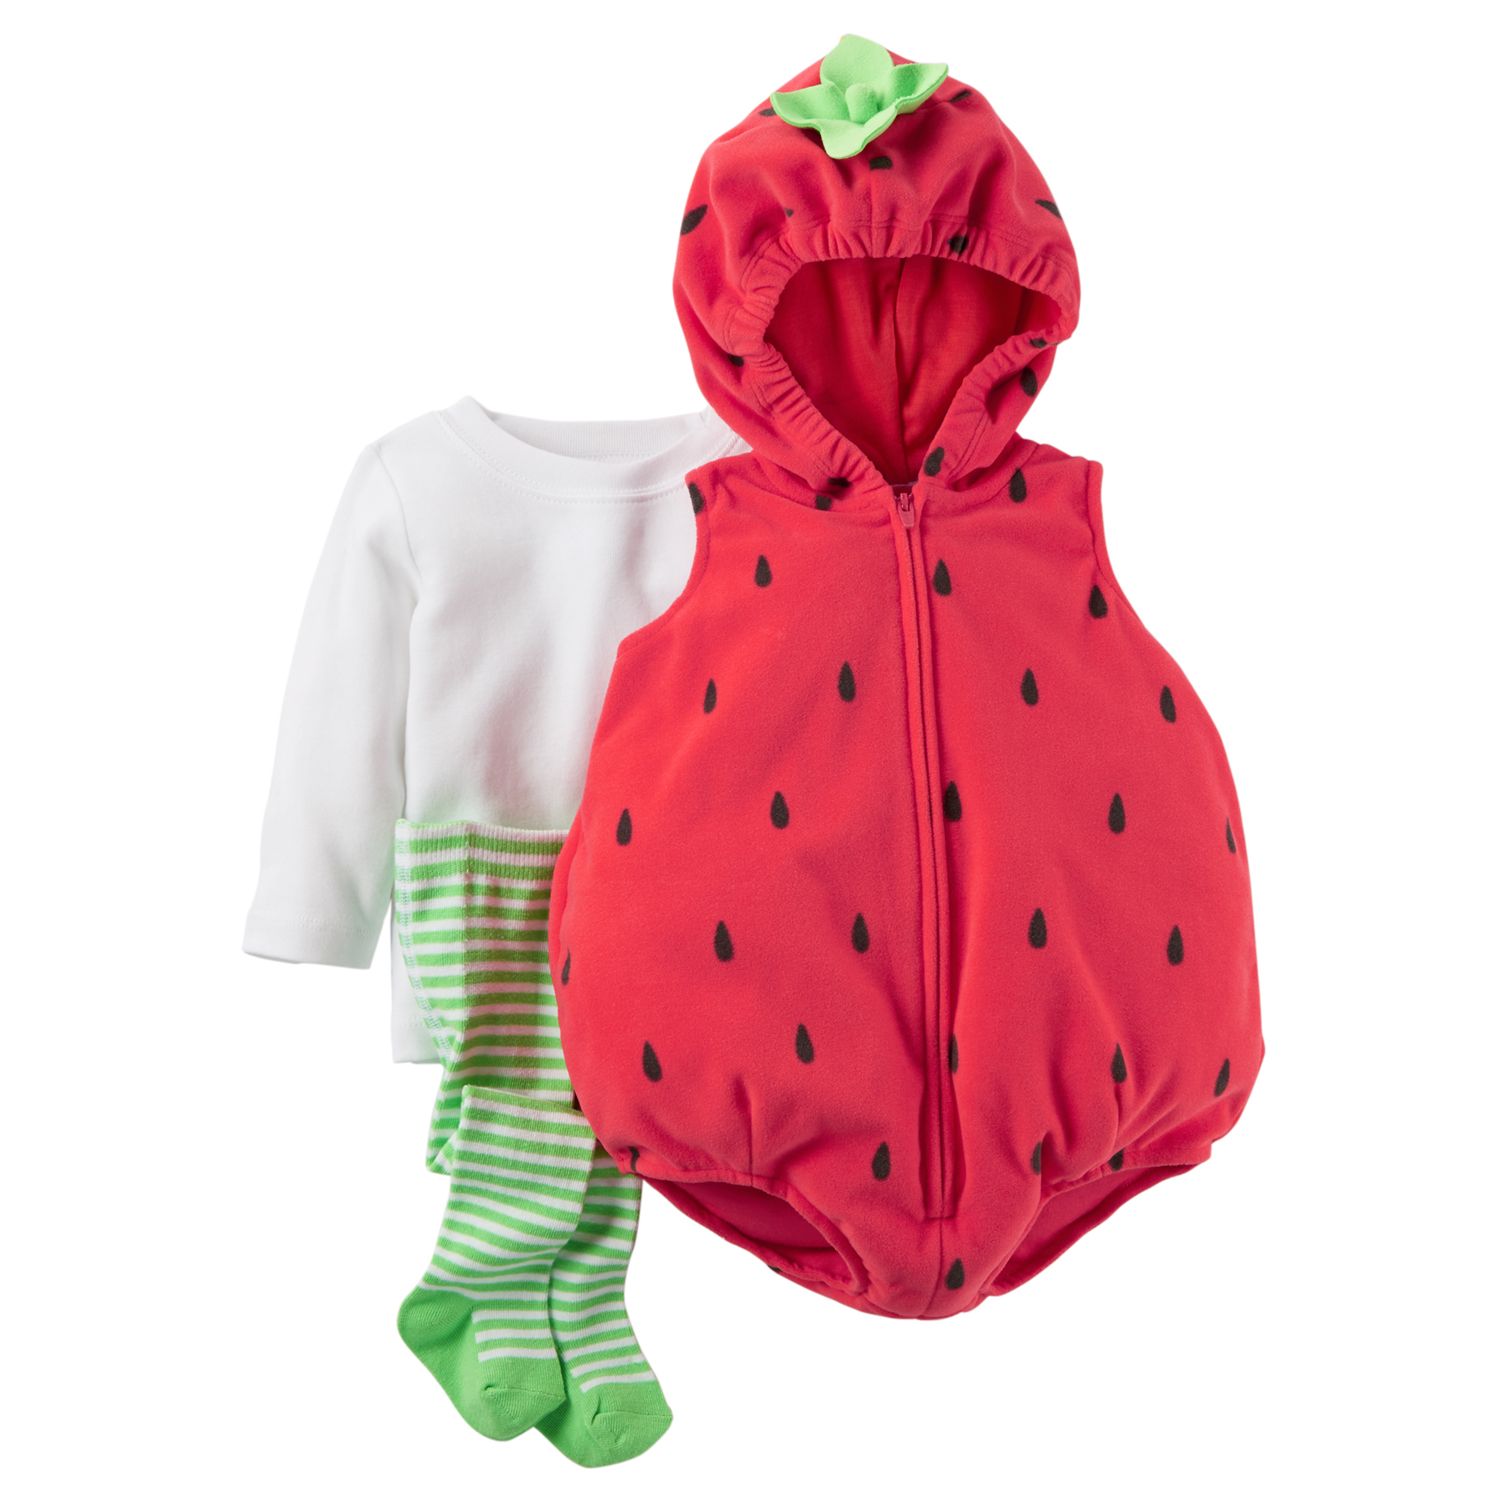 Baby Carter's 3-pc. Strawberry Costume